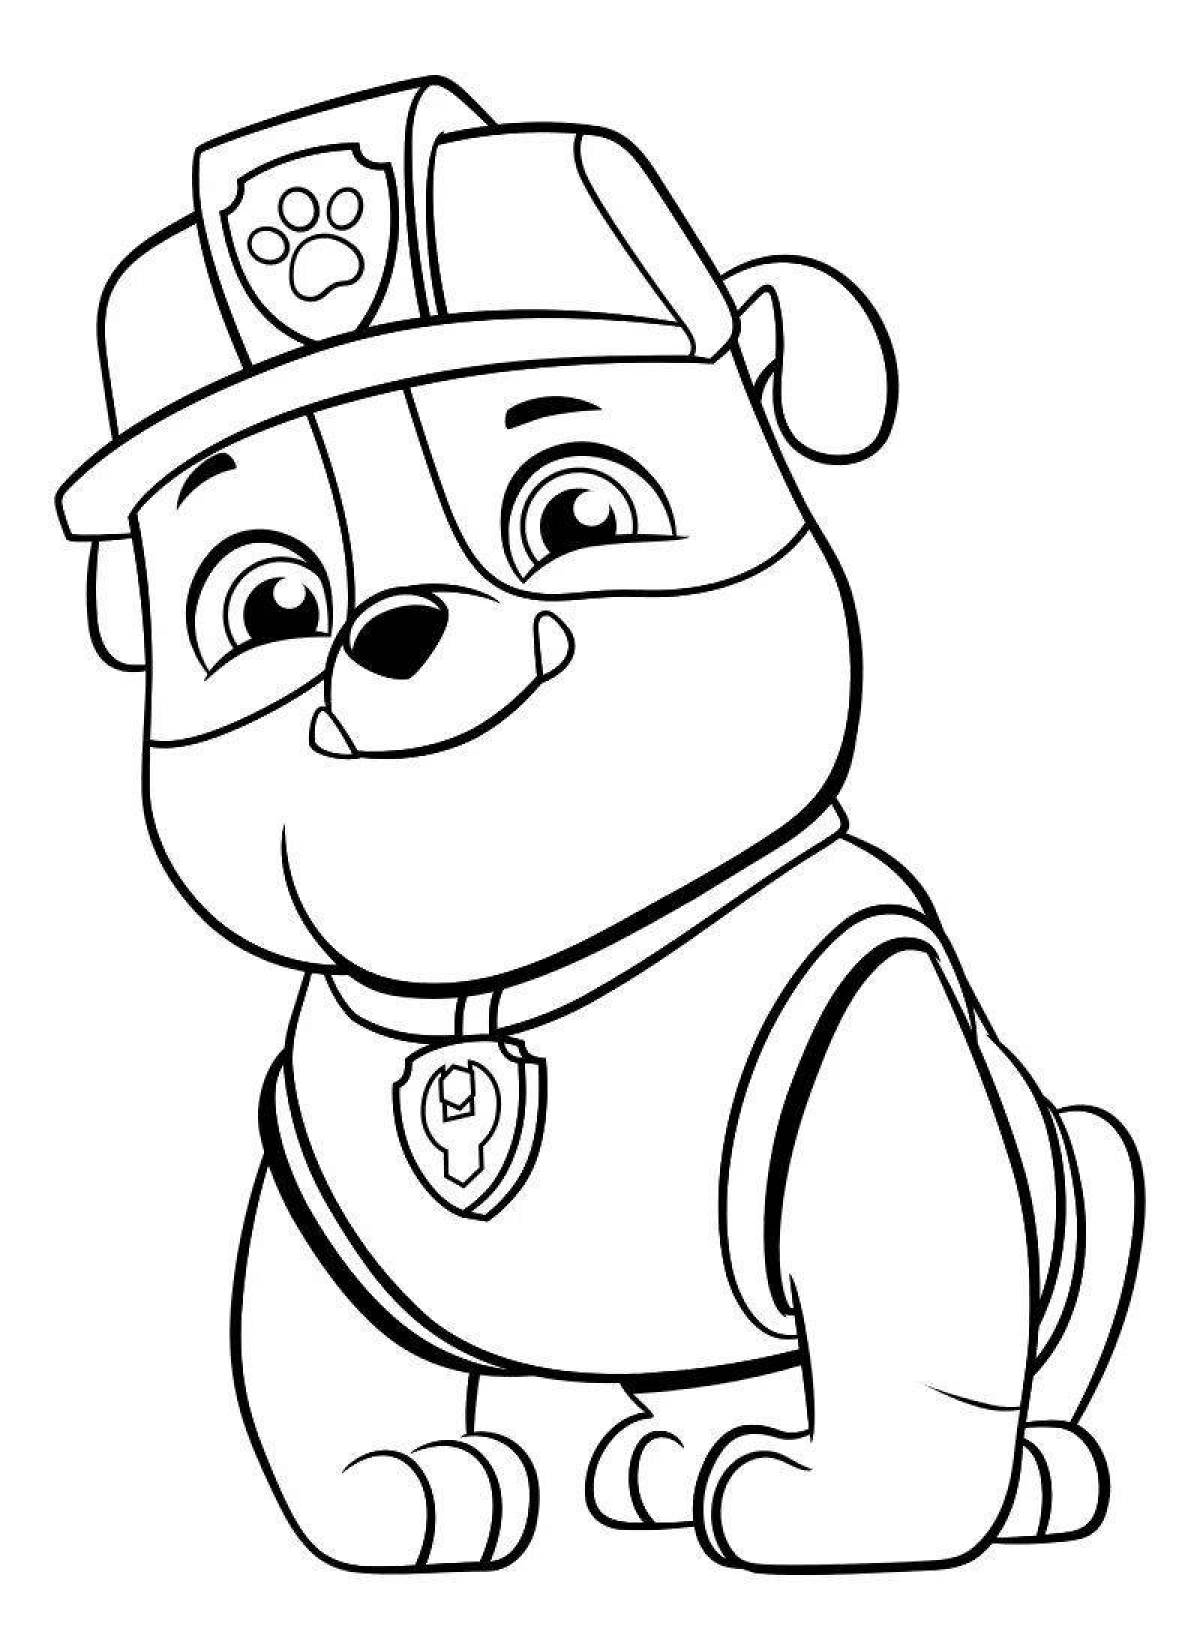 Cute paw patrol coloring book for kids 5-6 years old